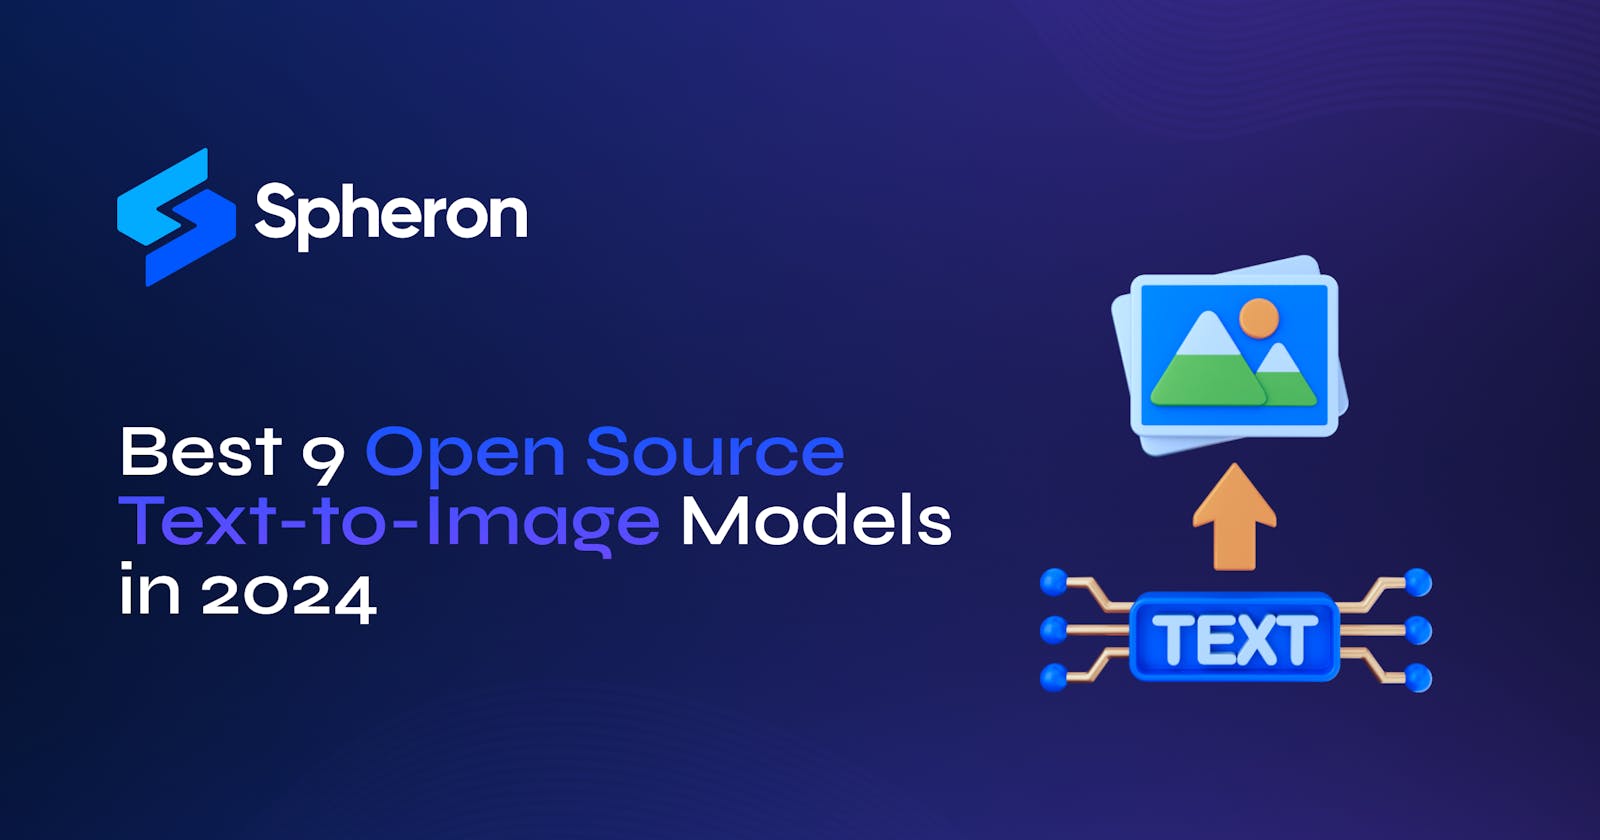 Best 9 Open Source Text-to-Image Models in 2024